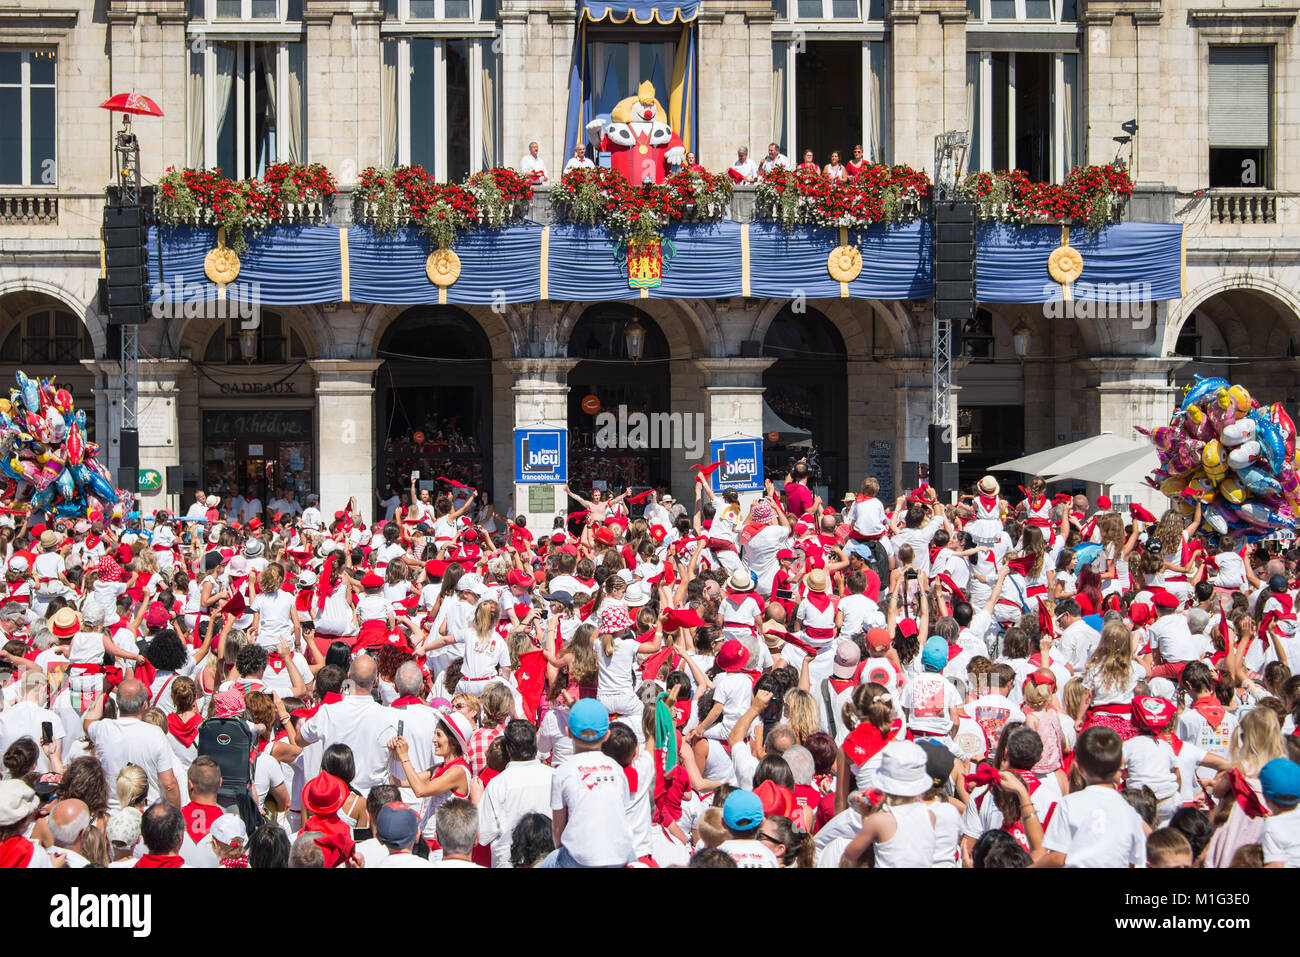 Crowd of people dressed in white and red cheering King Leon on the balcony  at the Summer festival of Bayonne (Fetes de Bayonne), France Stock Photo